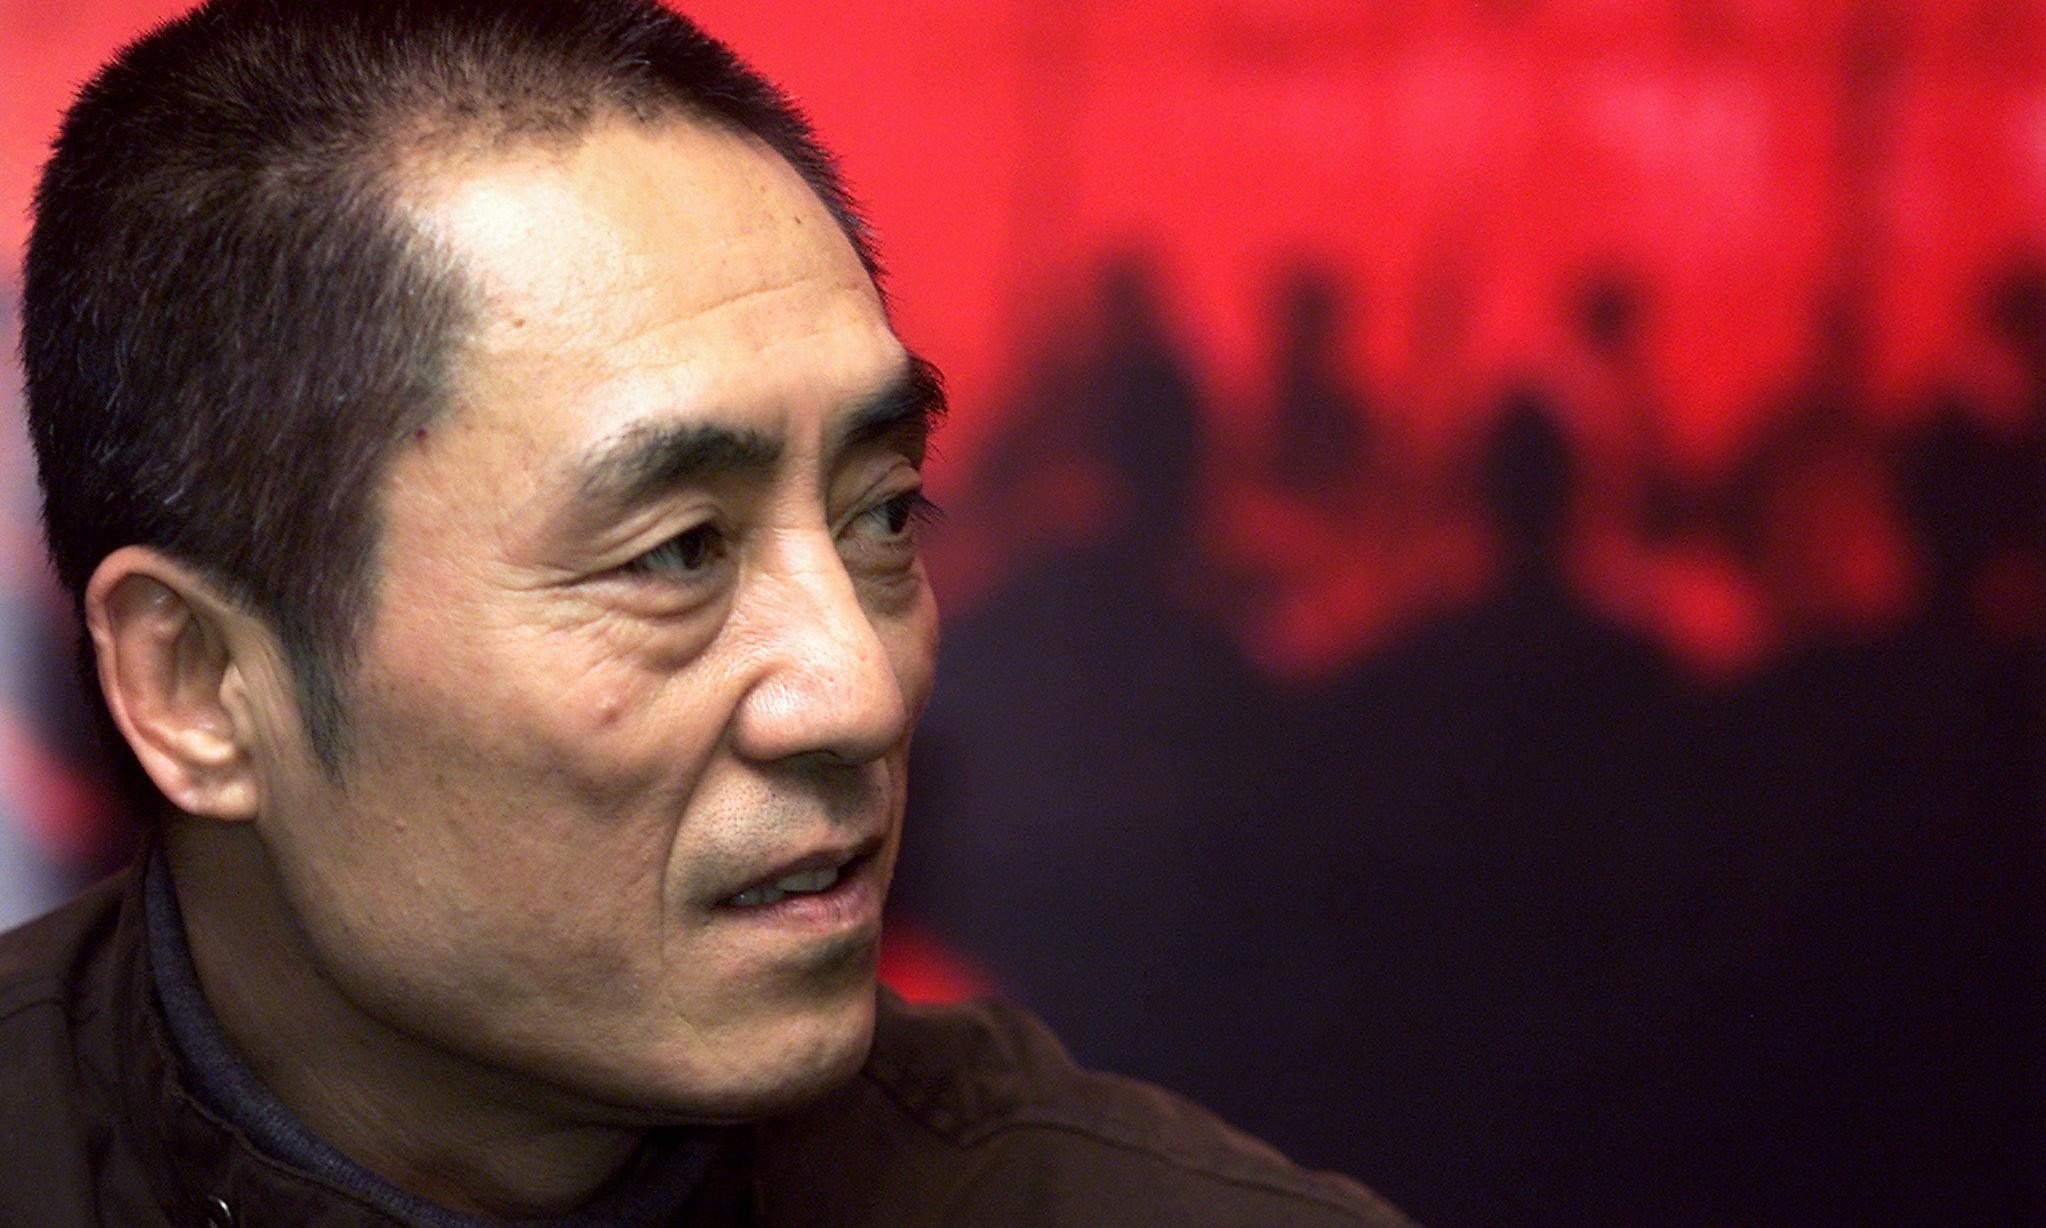 Snipers': Zhang Yimou's Korean War film misses its mark – The